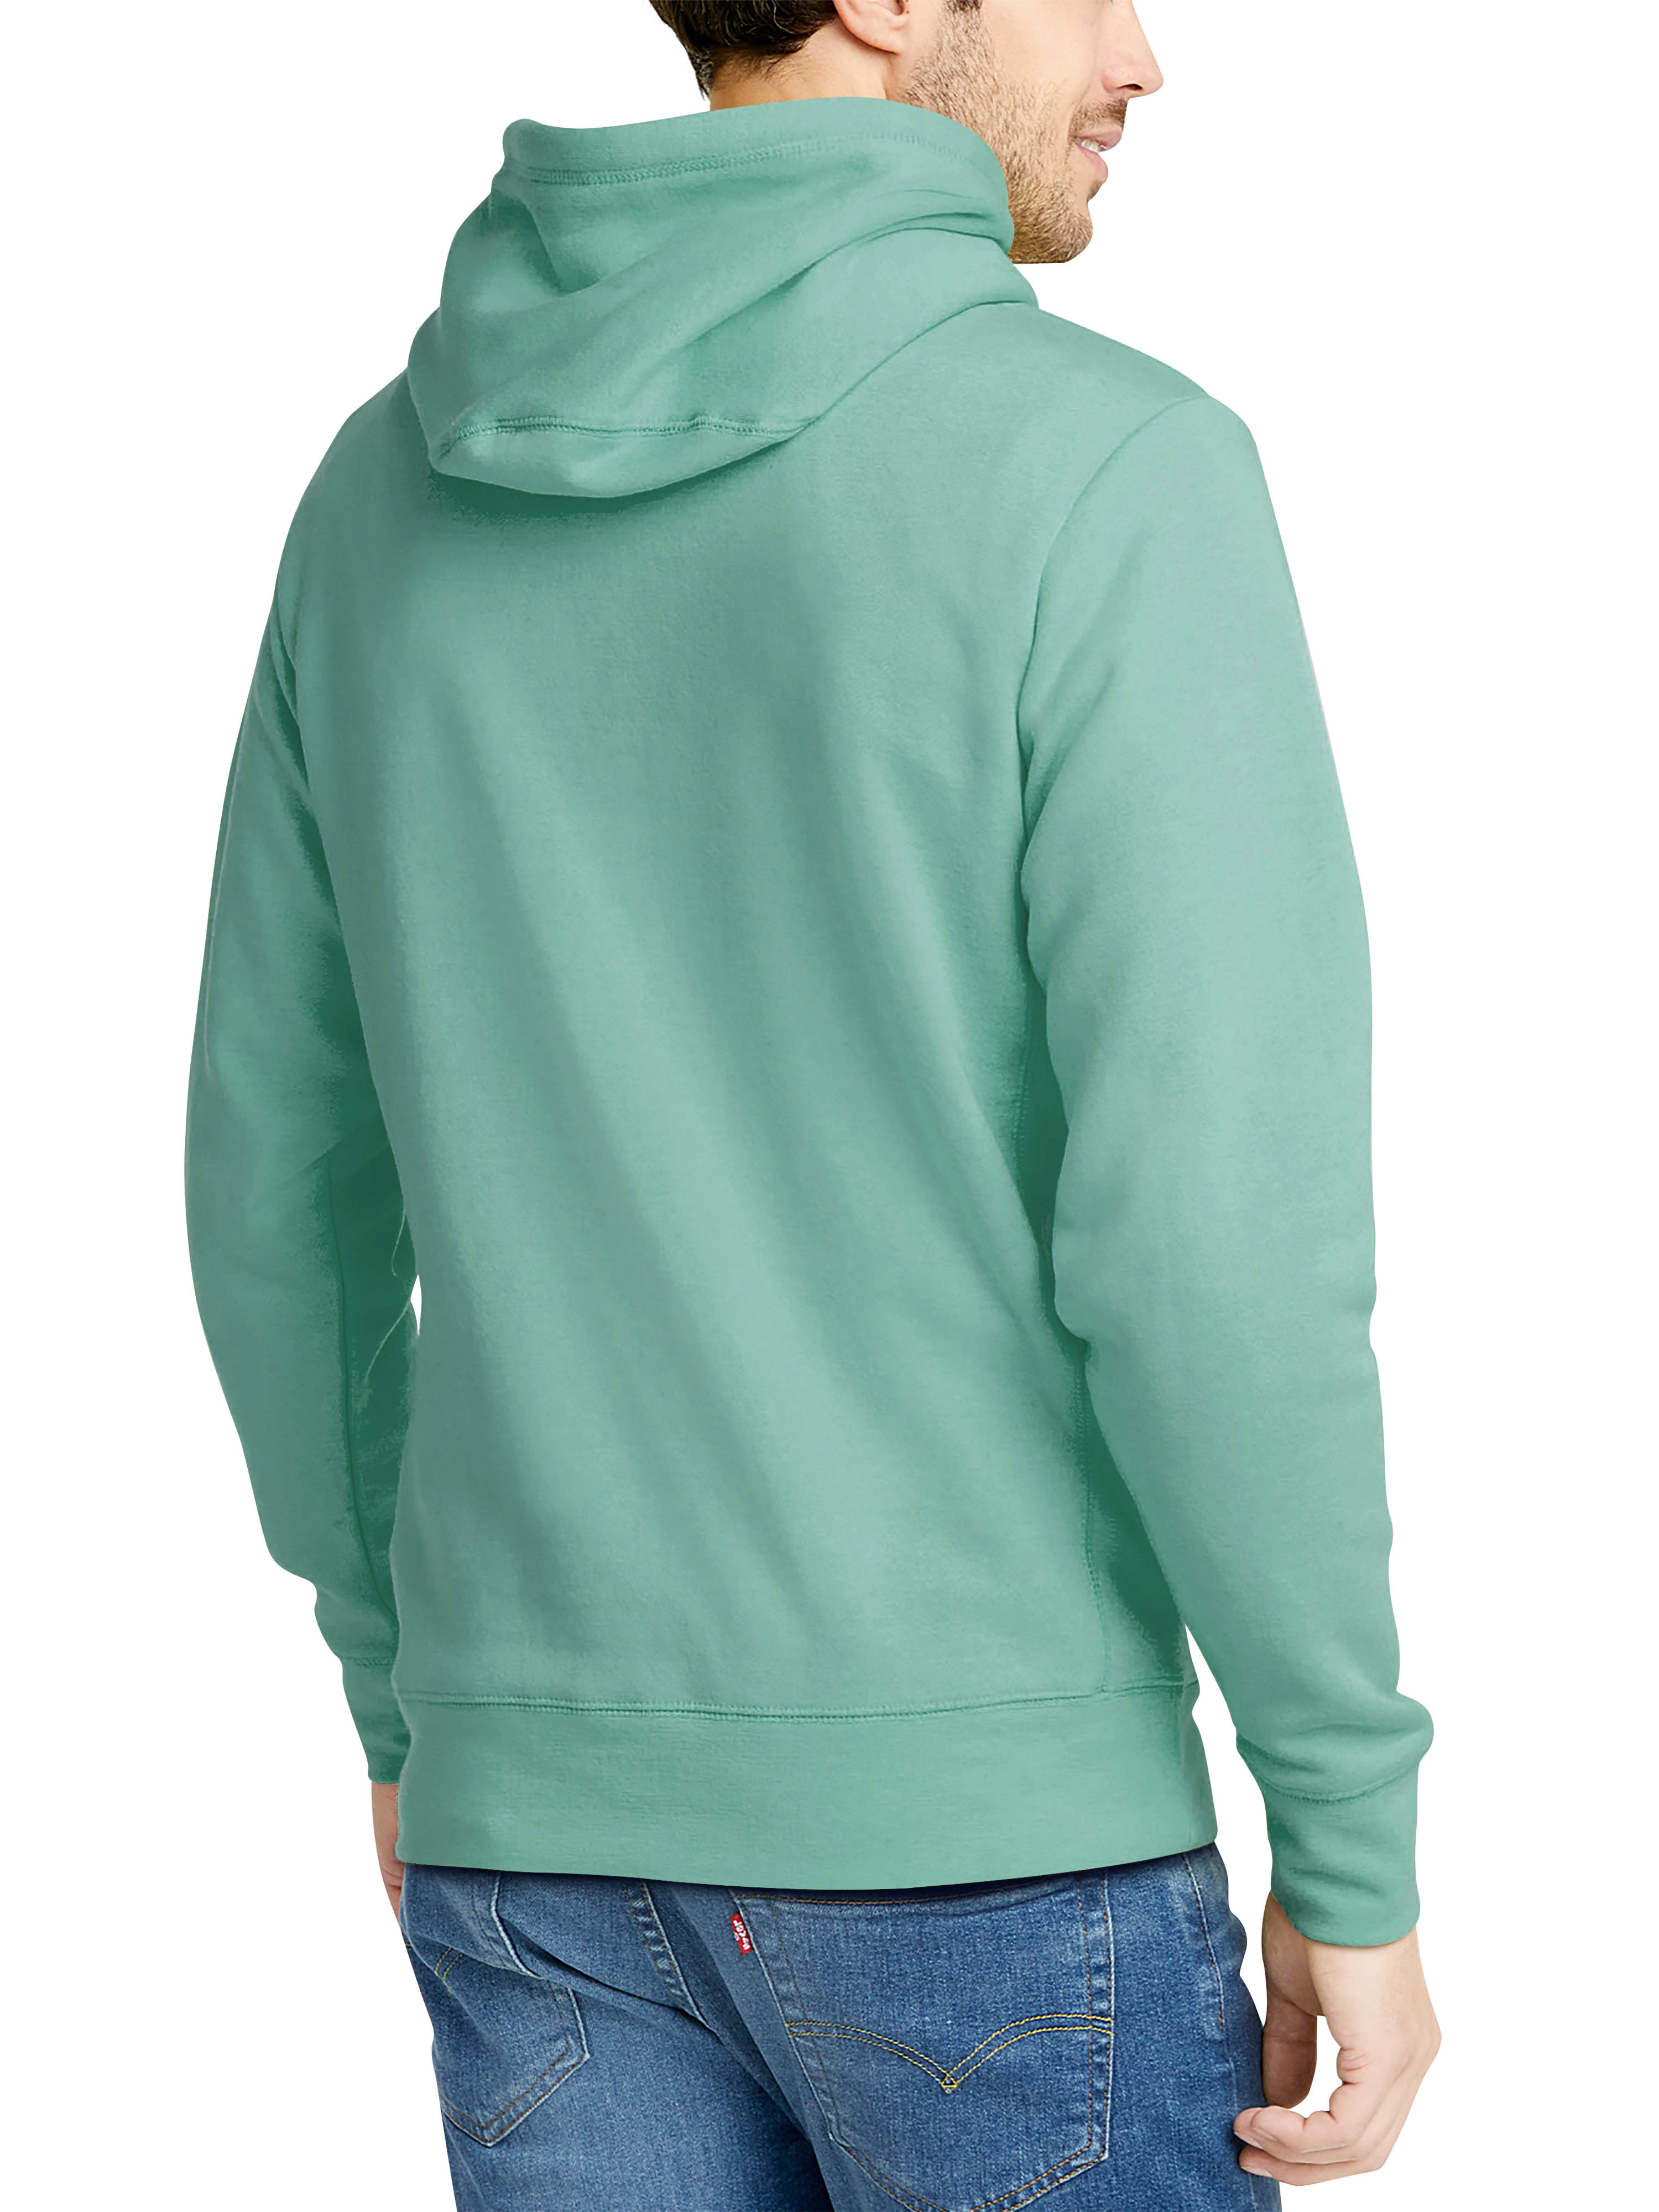 Hat and Beyond Mens Lightweight Pullover Hoodie Sweatshirt Ultra Soft Fleece Lined Cotton Hooded Sweater